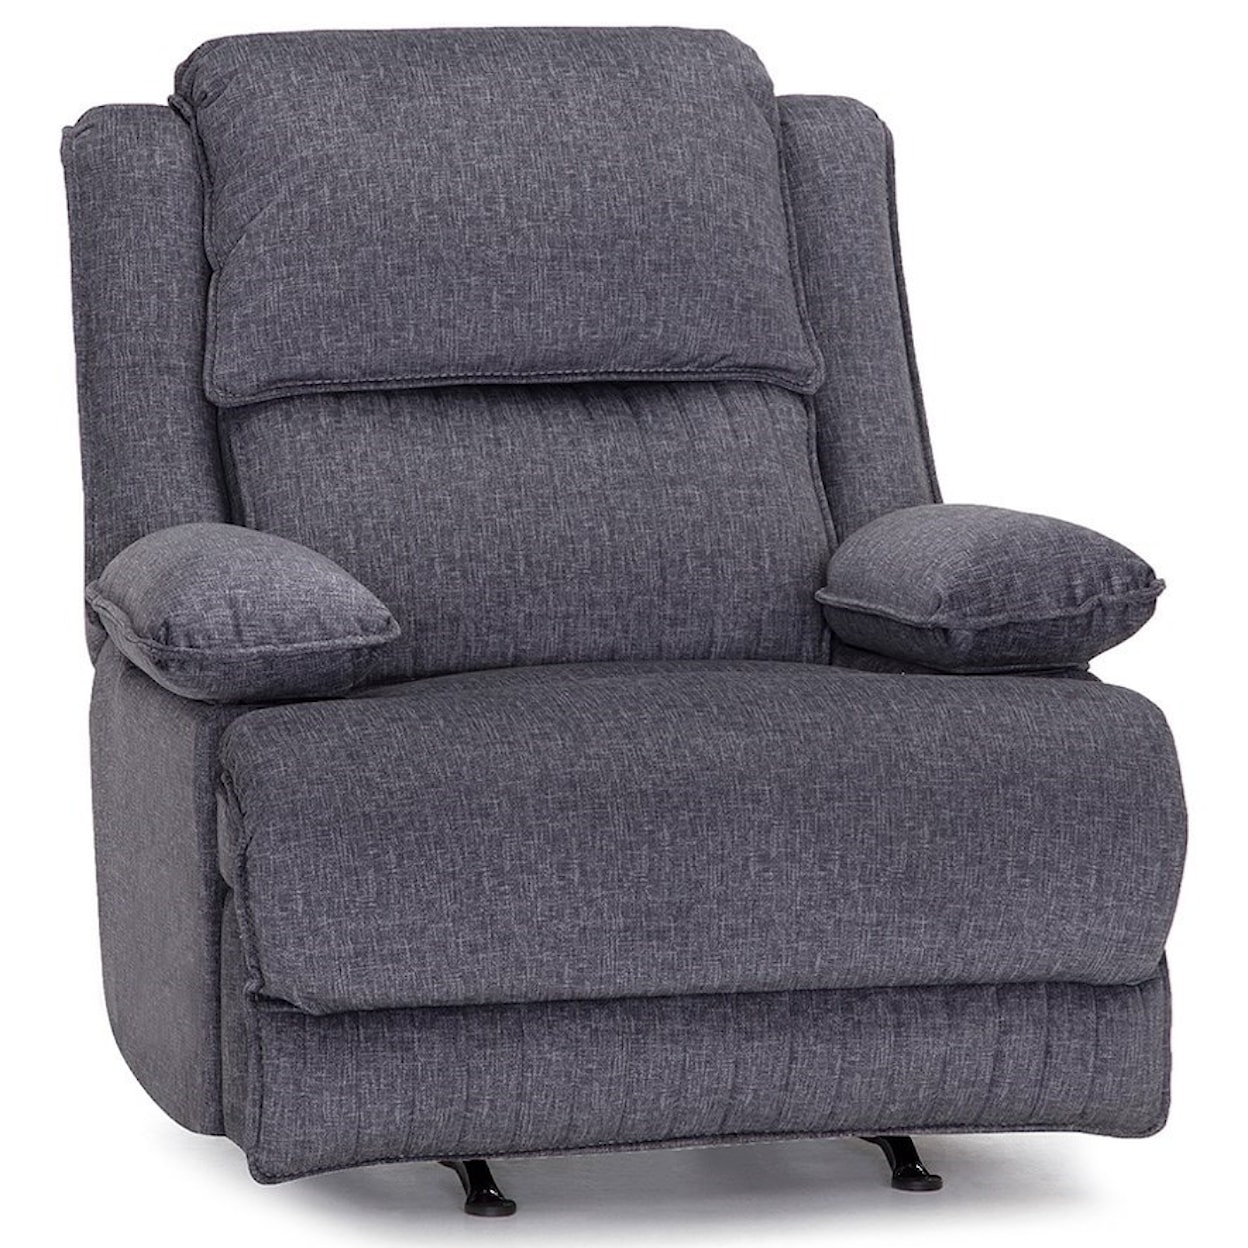 Franklin 4578 Power Rocker Recliner with Dual Storage Arms